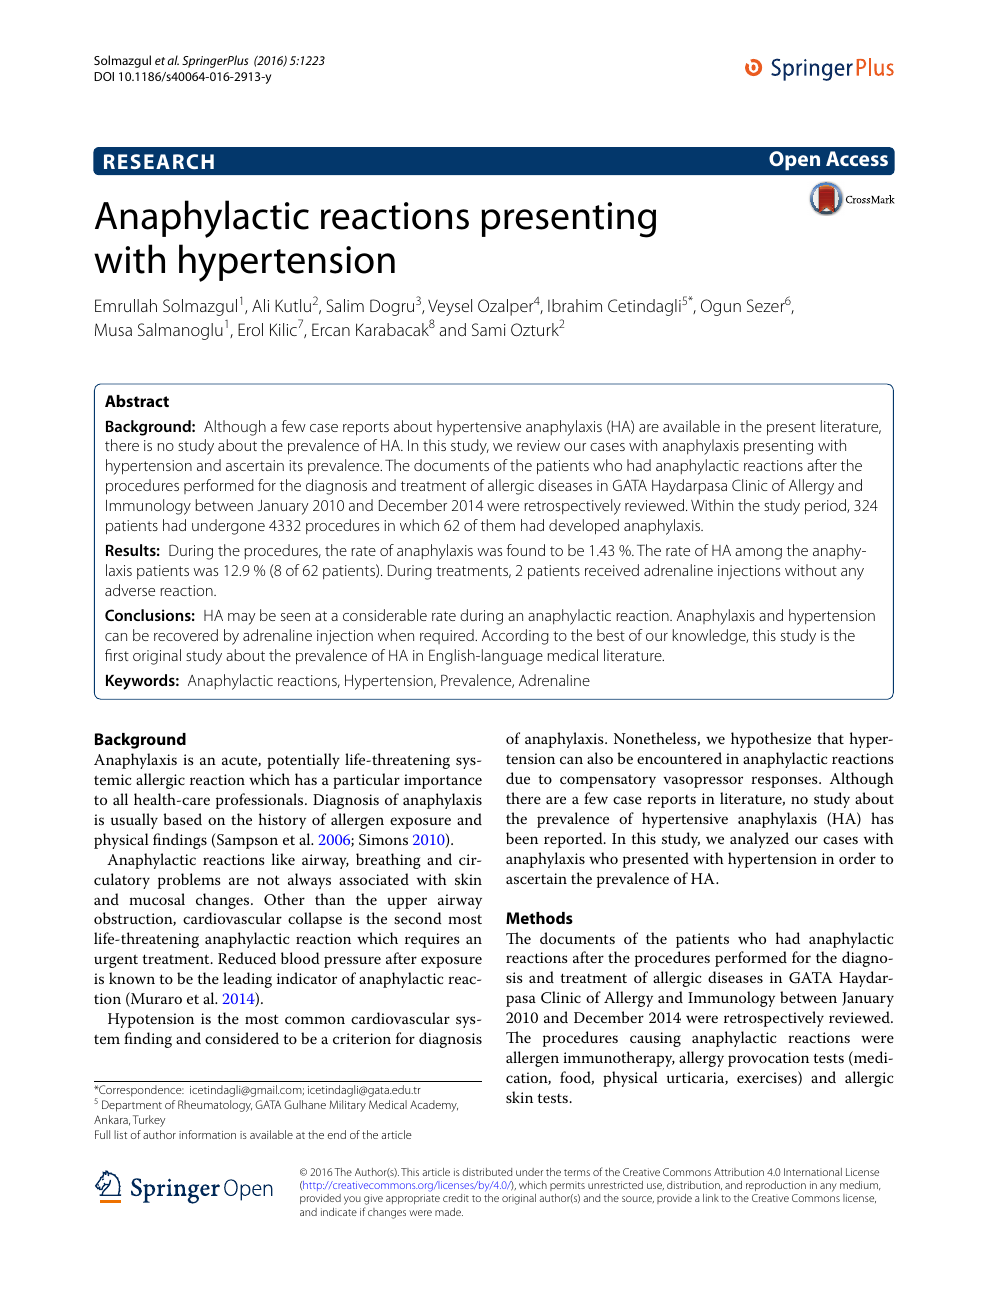 Anaphylactic Reactions Presenting With Hypertension Topic Of Research Paper In Clinical Medicine Download Scholarly Article Pdf And Read For Free On Cyberleninka Open Science Hub